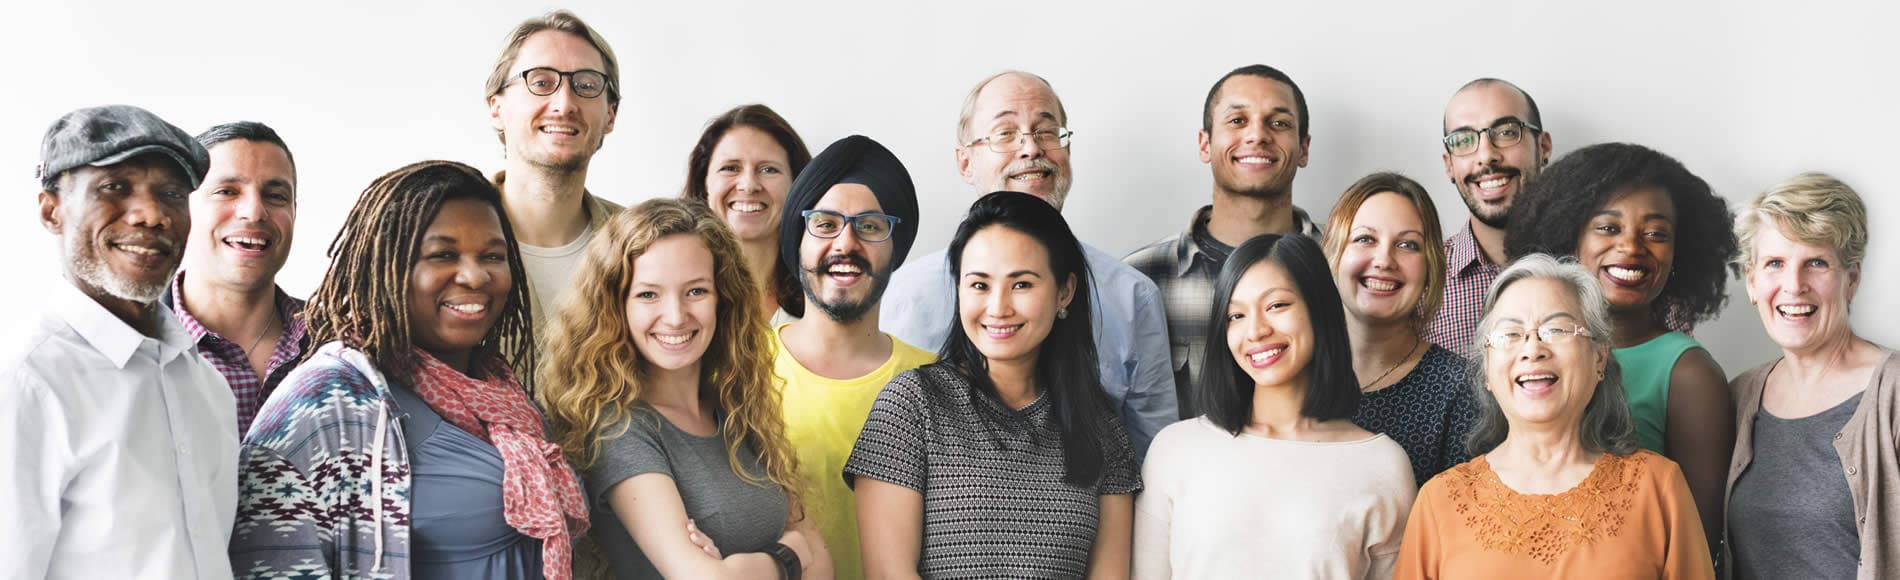 Group of multi-ethnic market research respondents standing smiling against a white background